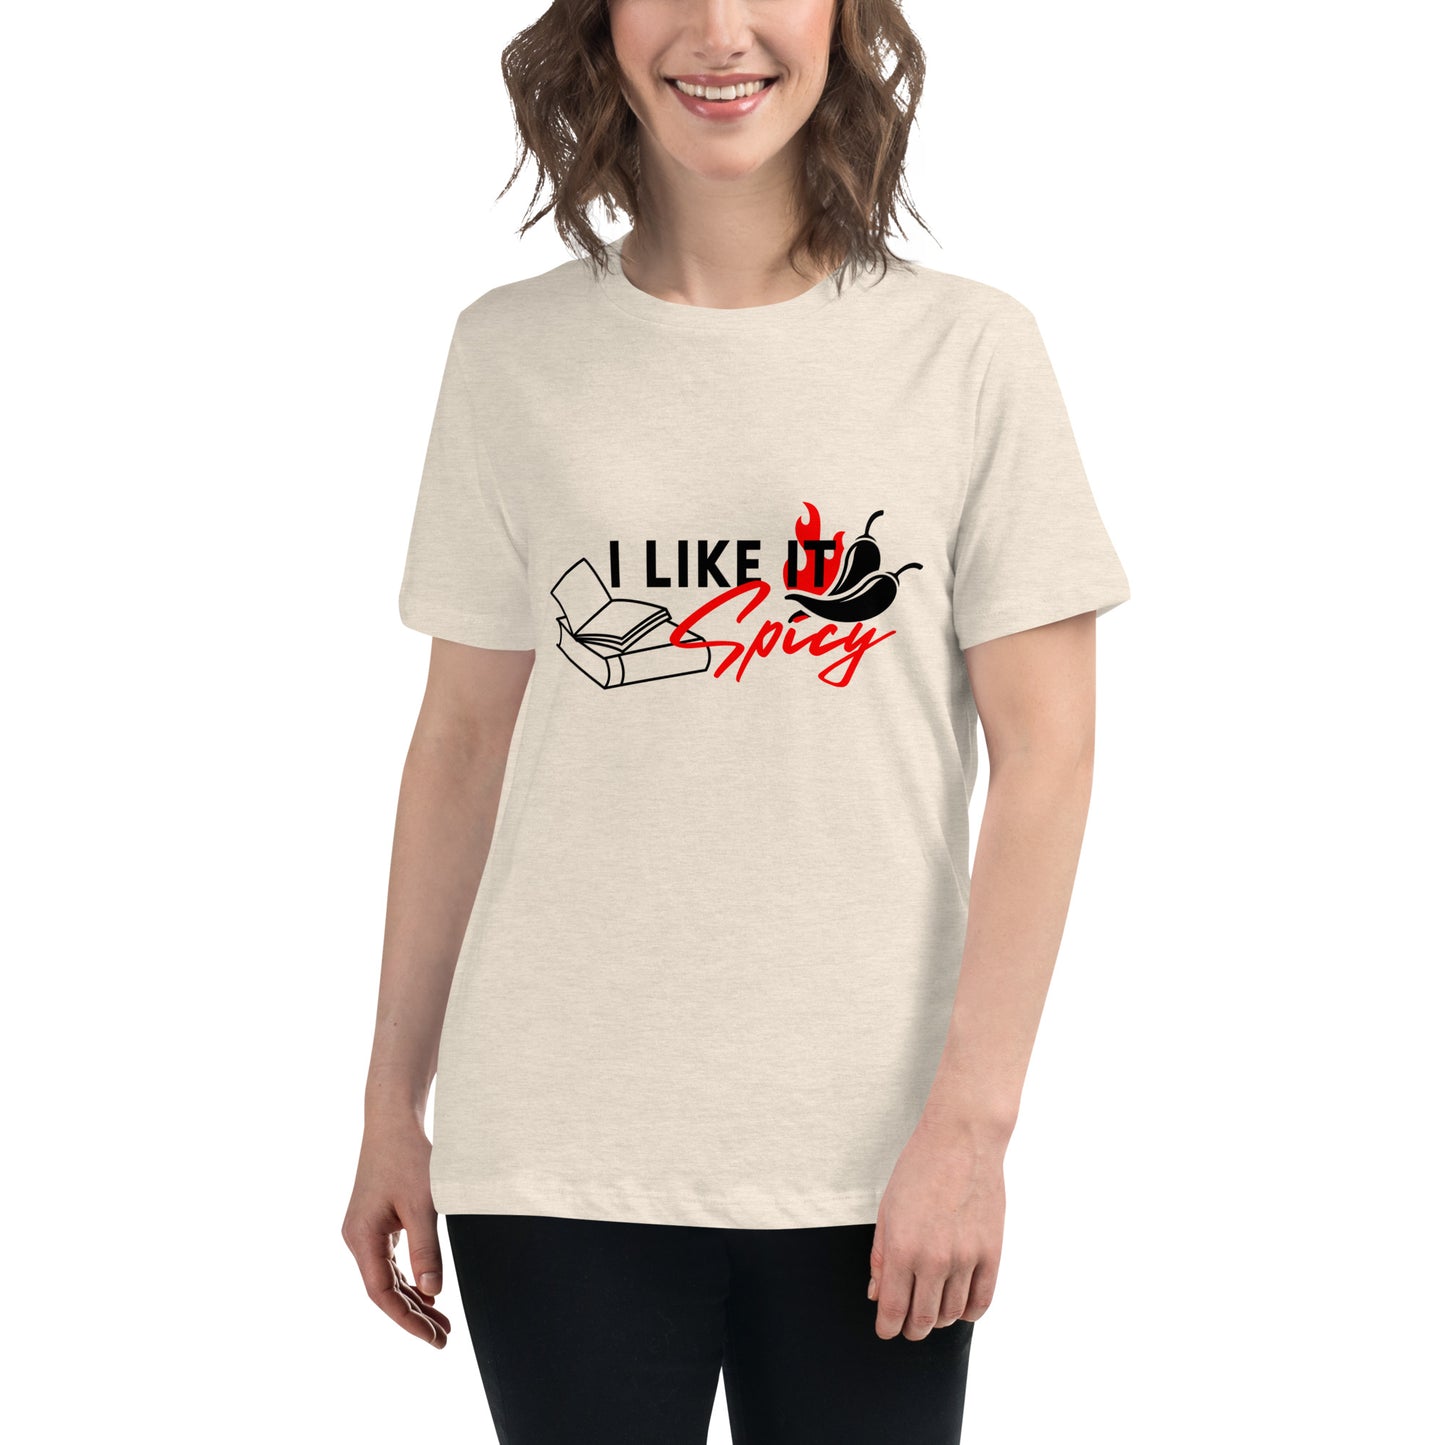 Spicy Women's Relaxed T-Shirt